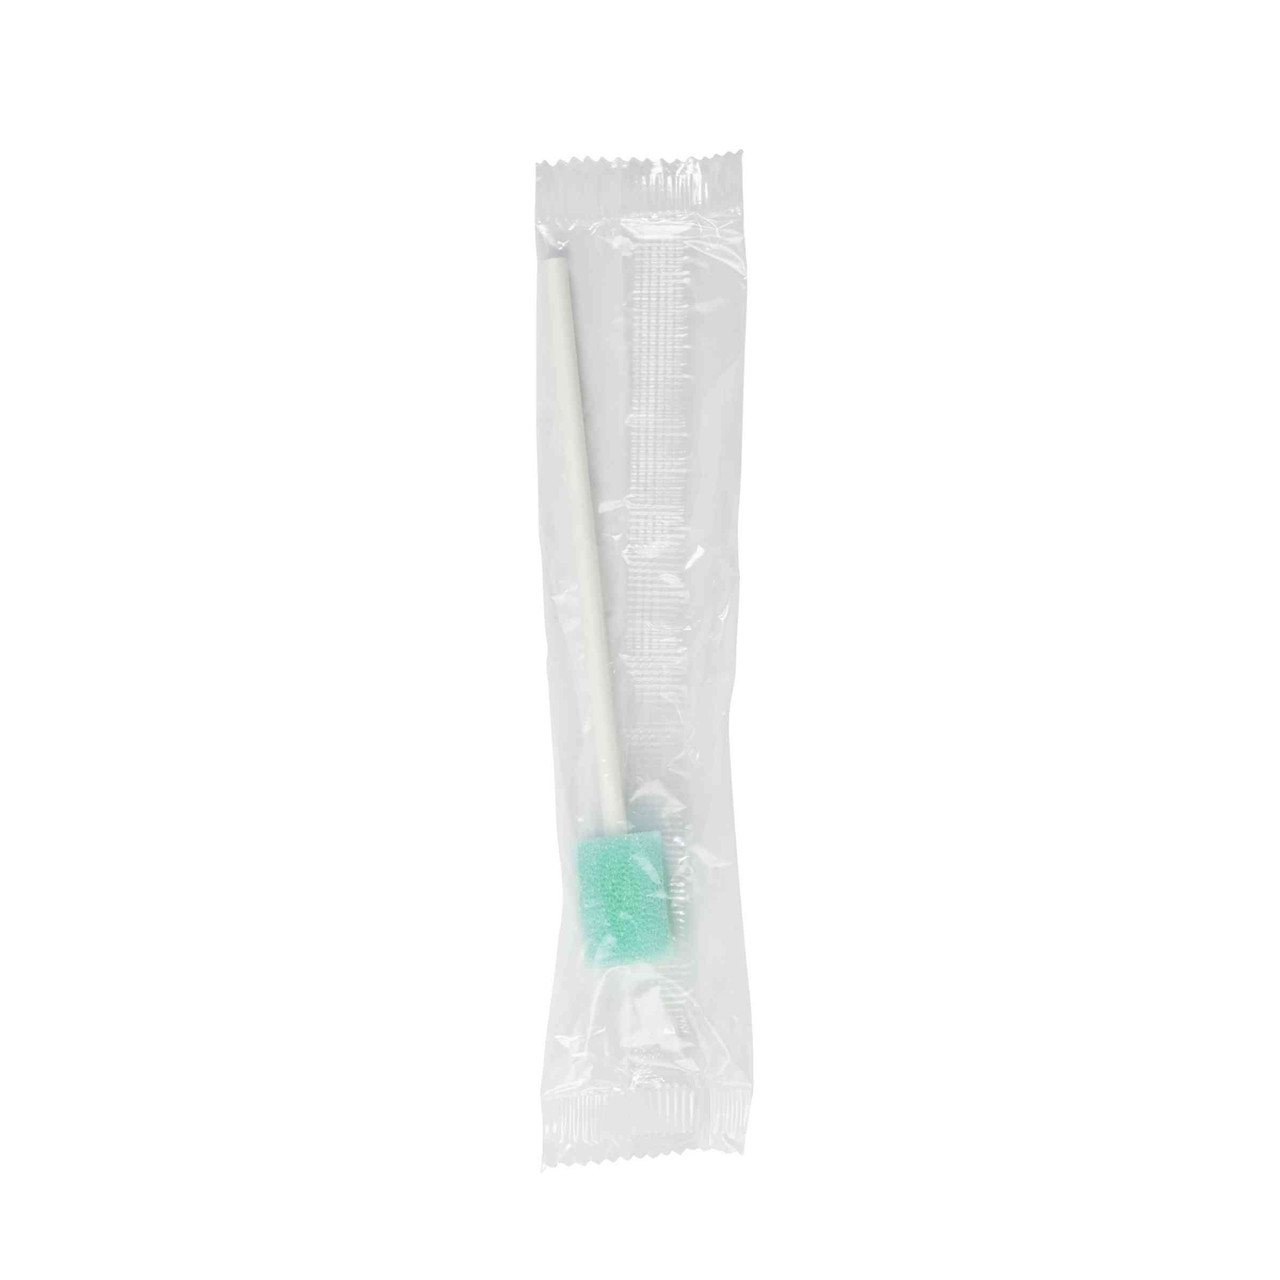 Avanos Oral Swab, Dentrifrice, Mint Flavor, Non-Sterile, Disposable, Individually Wrapped, 250/bx, 2 bx/cs